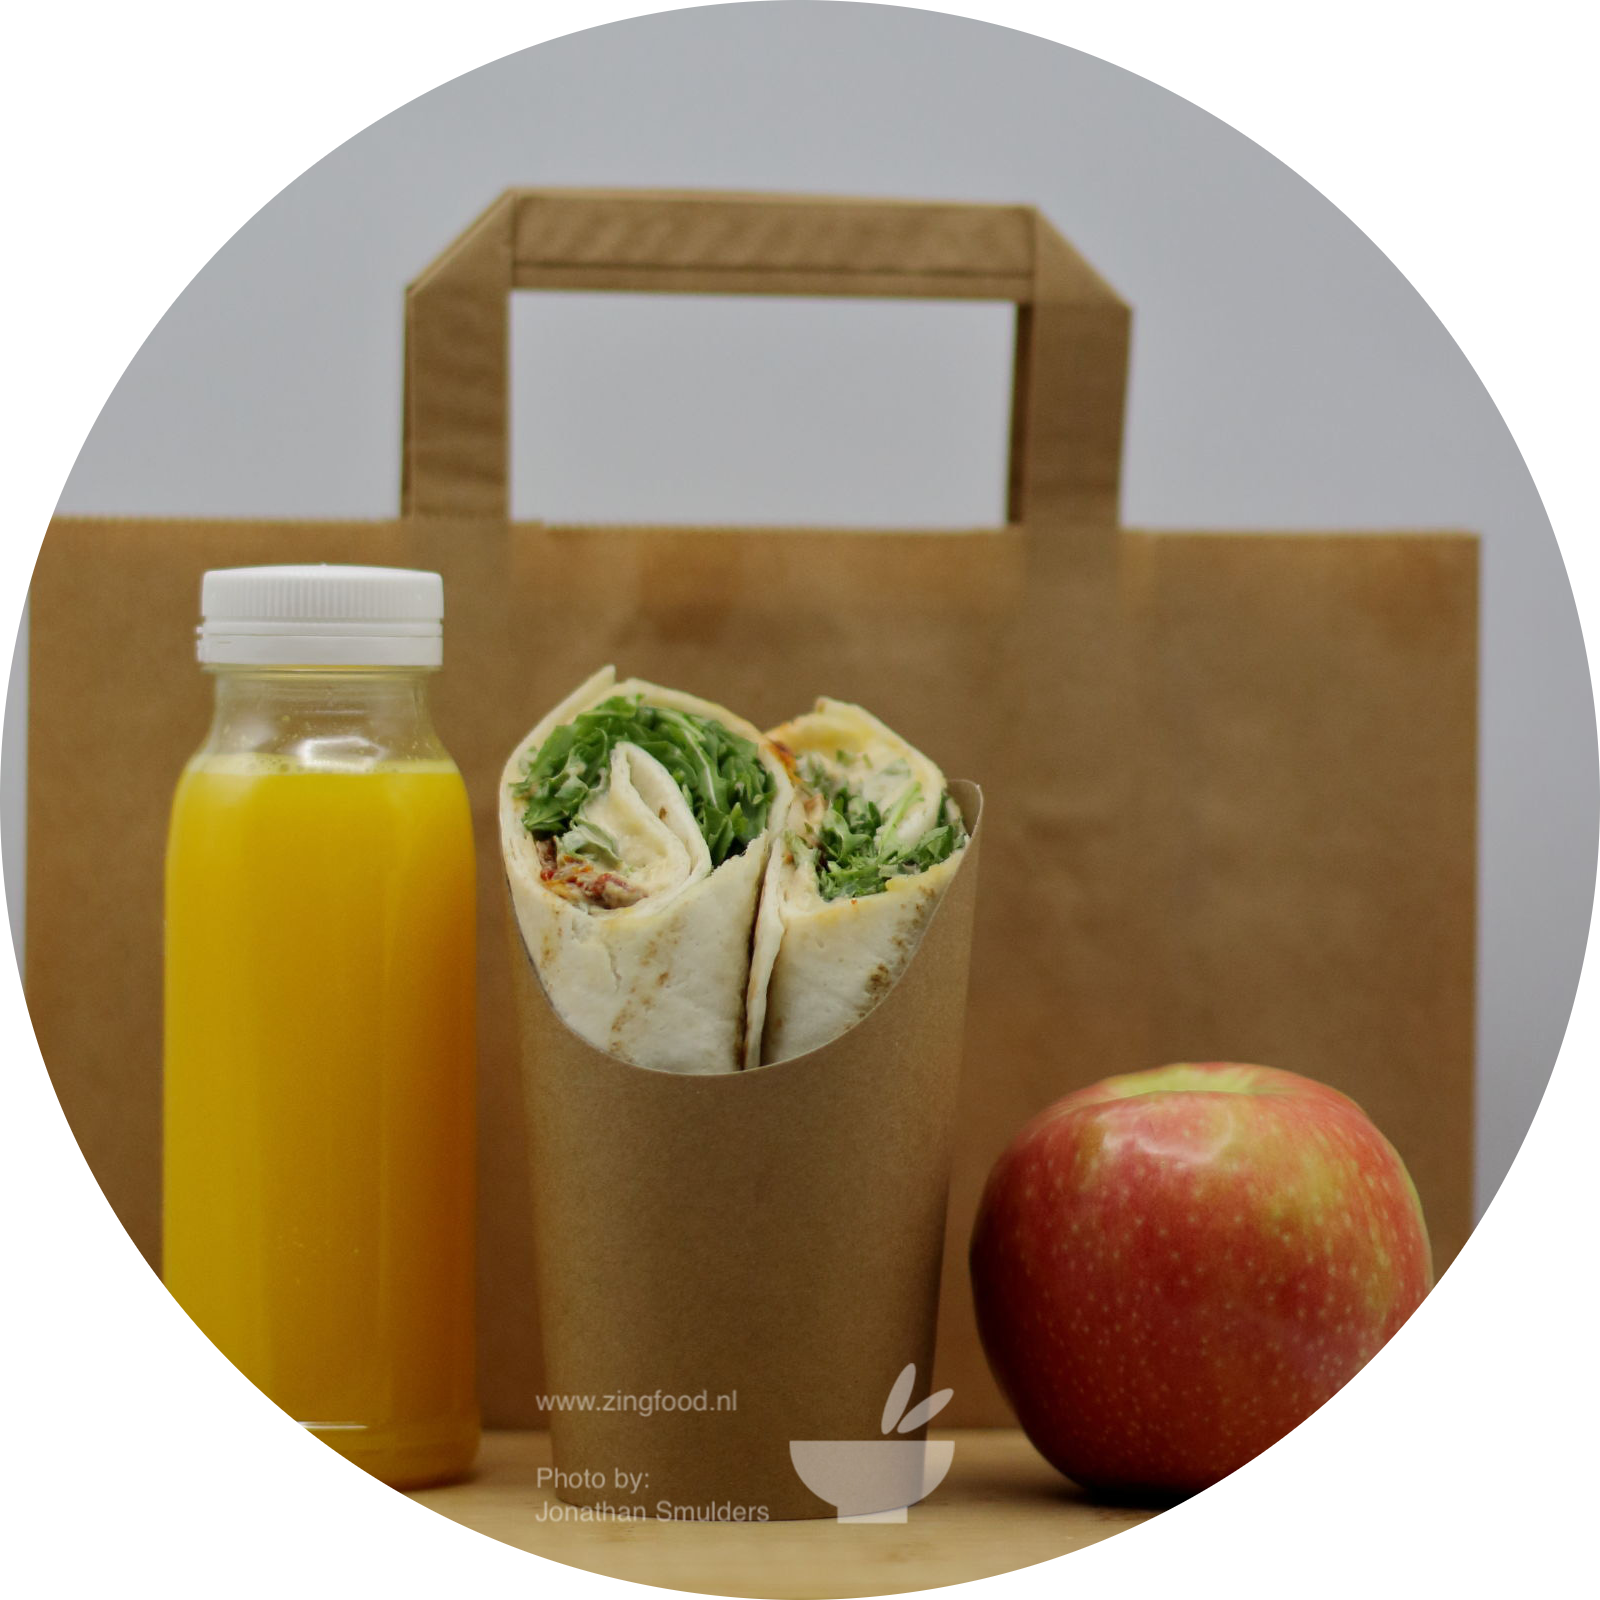 Lunch bag regular: wrap, juice and apple